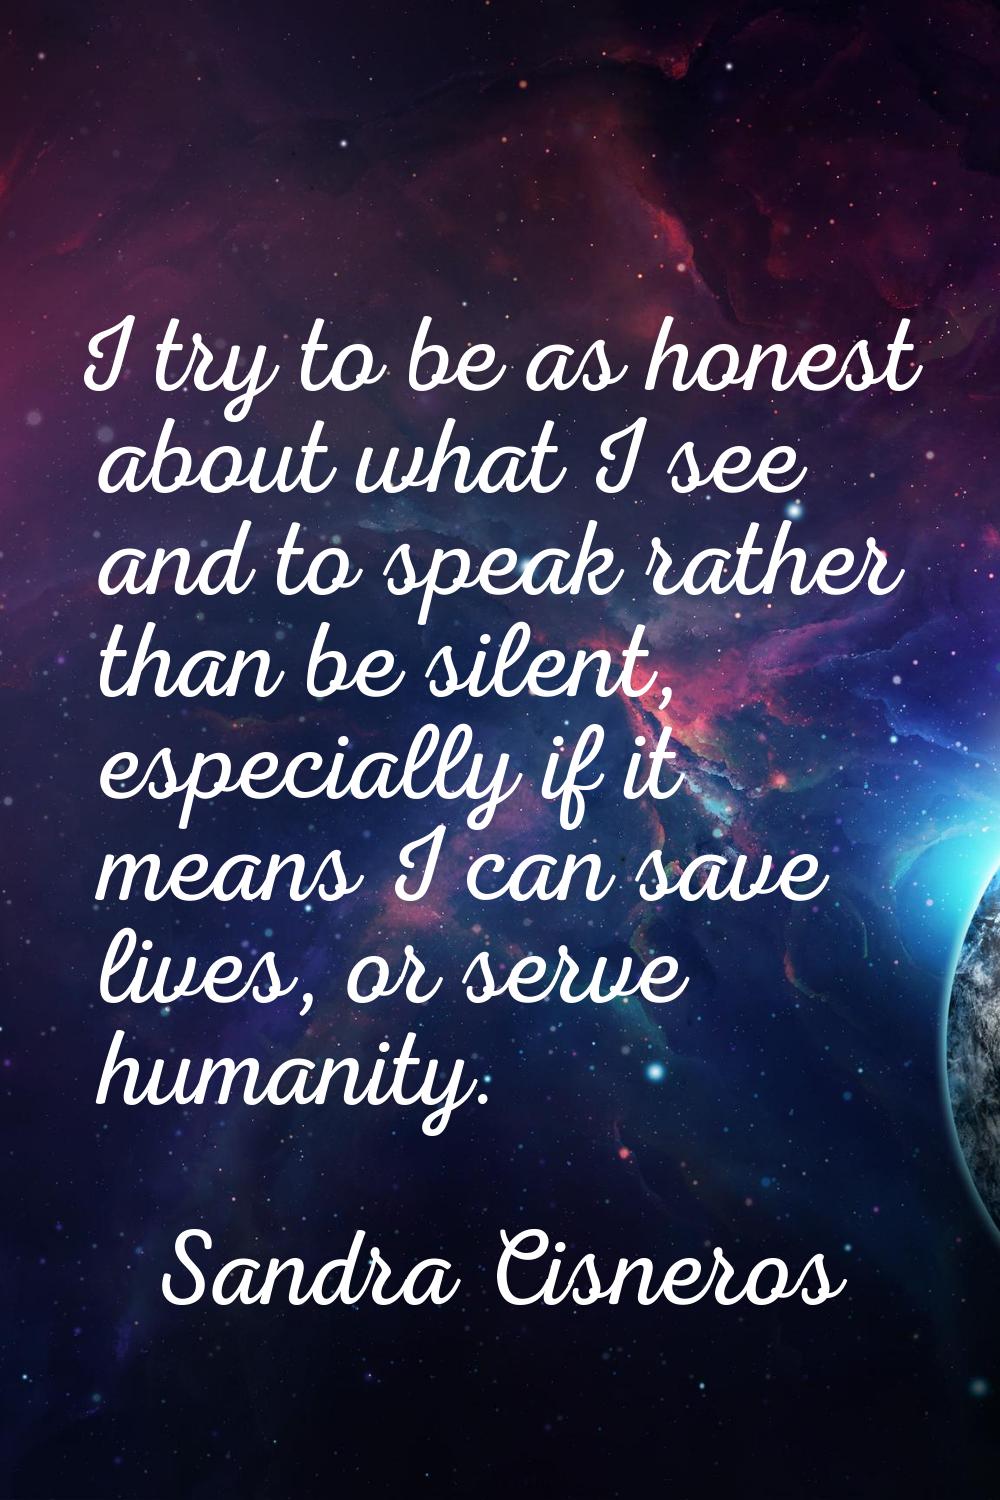 I try to be as honest about what I see and to speak rather than be silent, especially if it means I